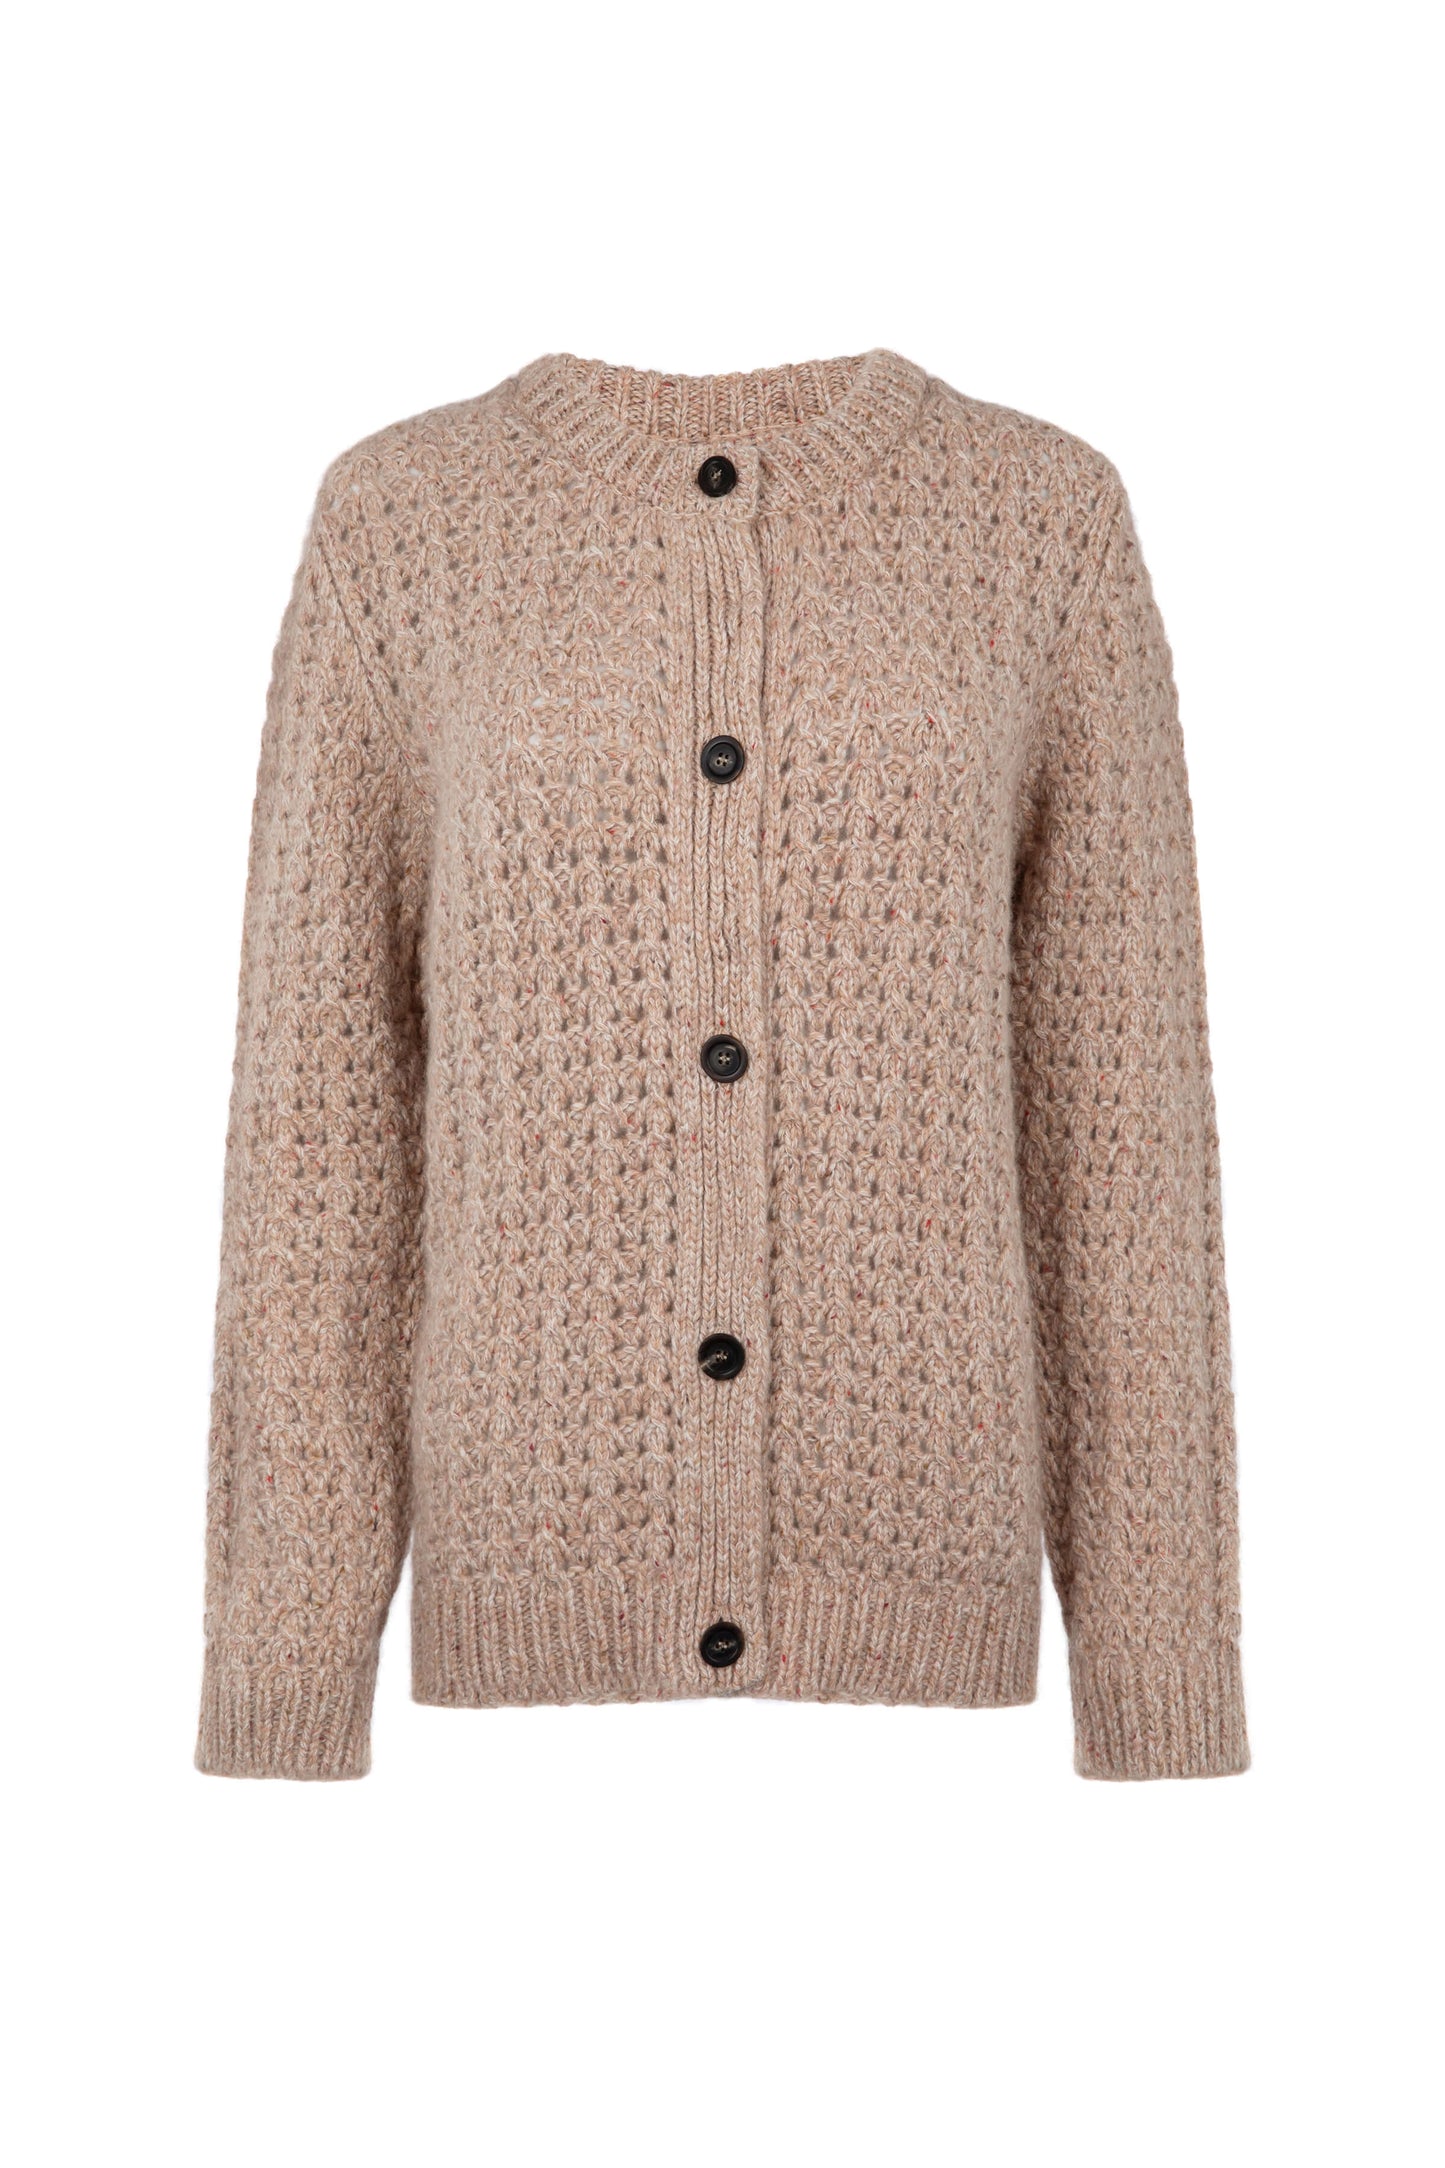 Johnstons of Elgin SS24 Women's Knitwear Camel Donegal Marl Crochet Stitch Donegal Cashmere Cardigan KAB05215004610